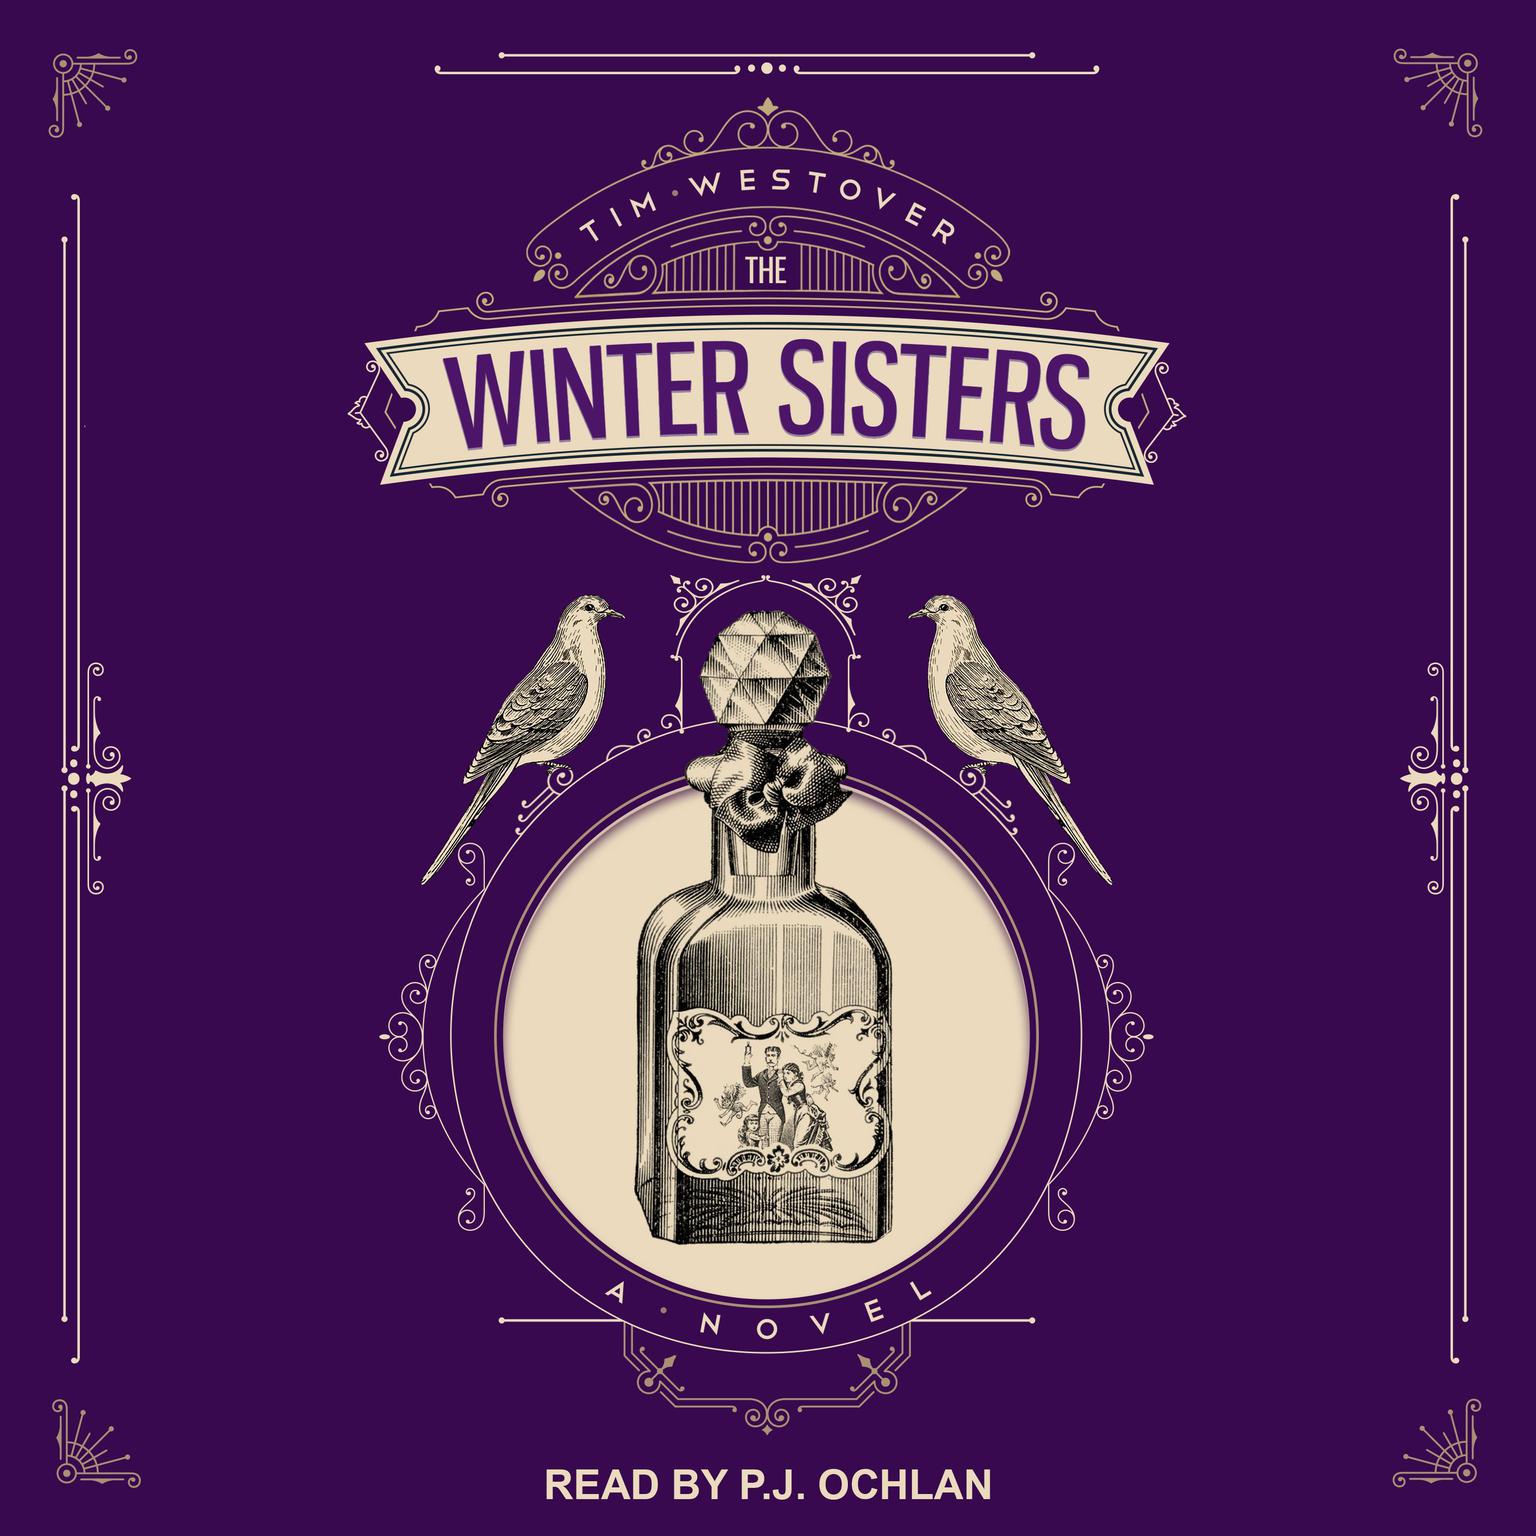 The Winter Sisters: A Novel Audiobook, by Tim Westover